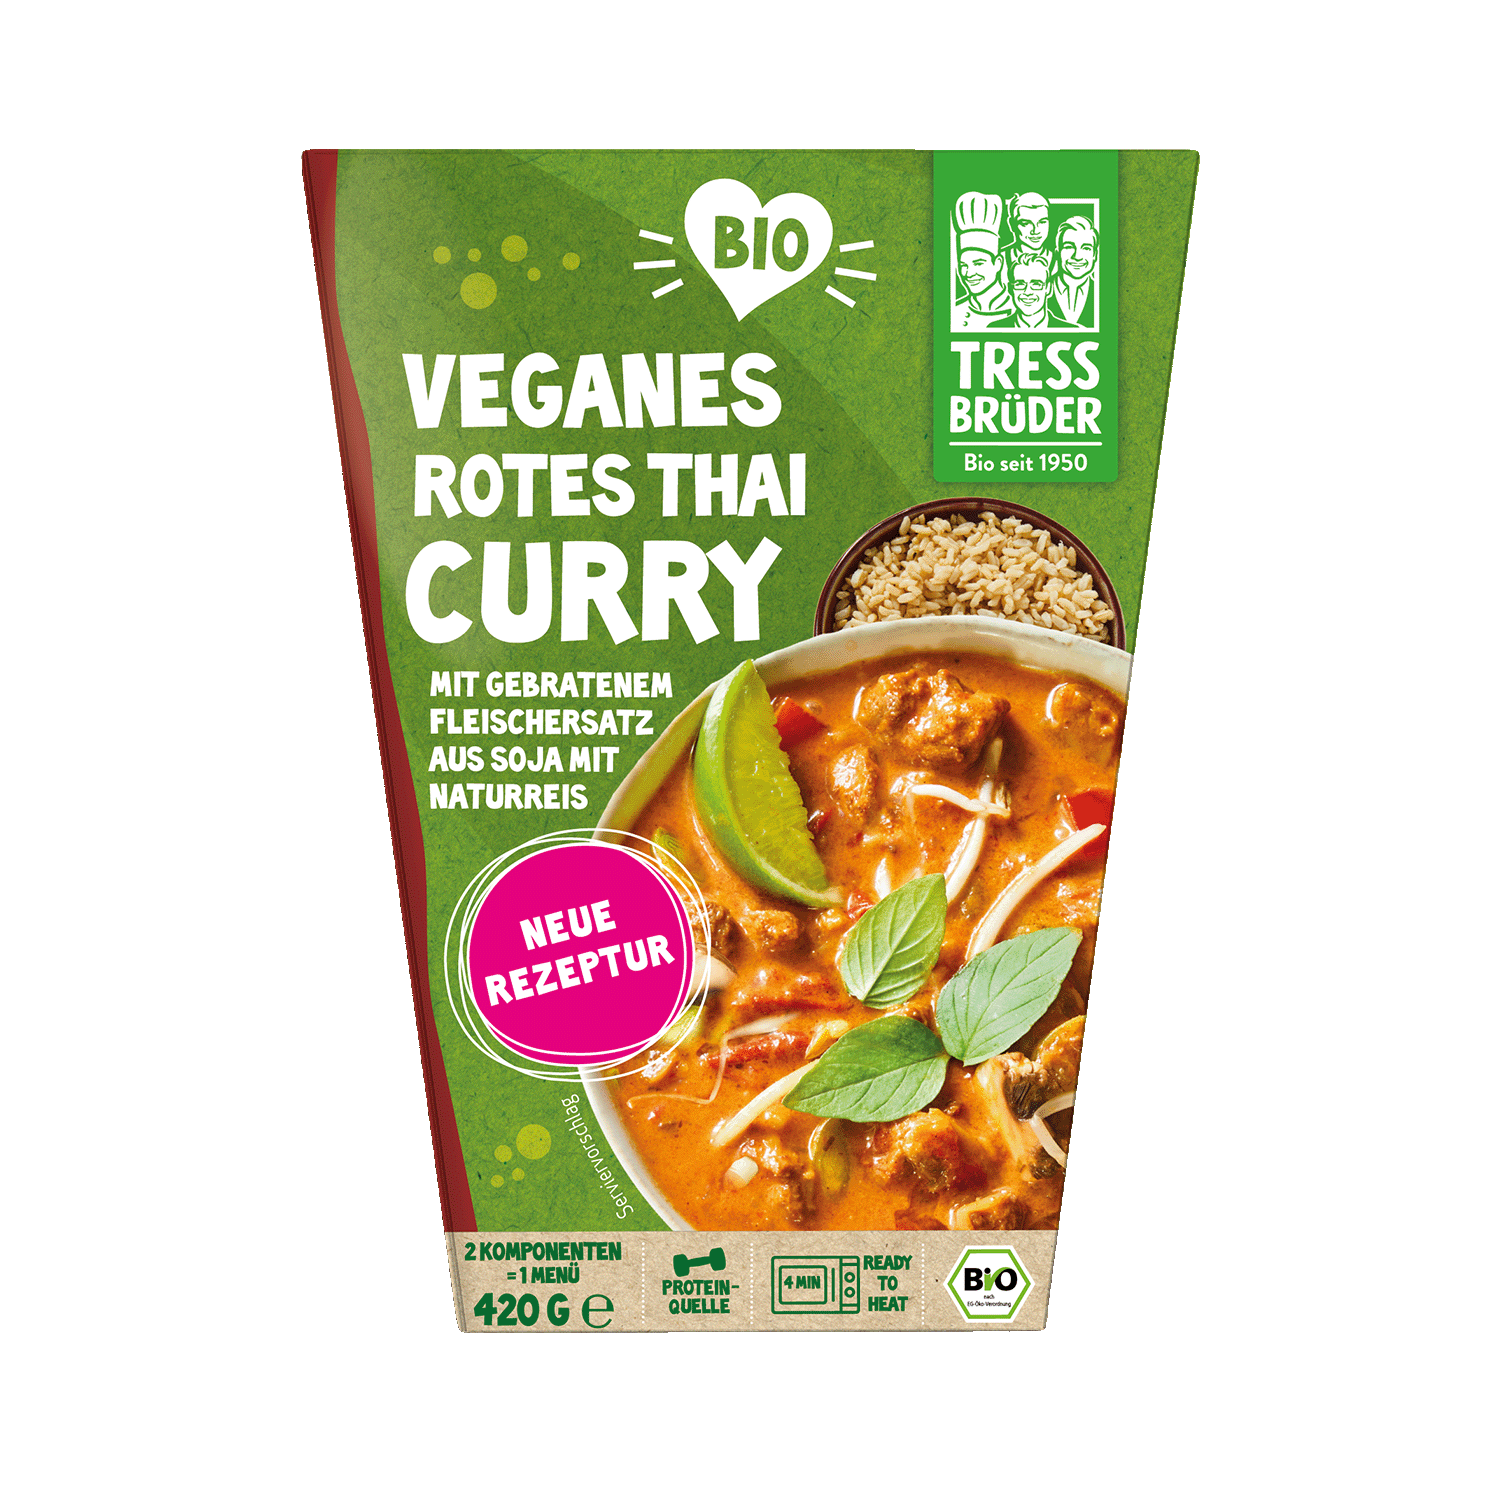 Vegan red Thai curry with roasted soya meat substitute with brown rice, Organic, 420g